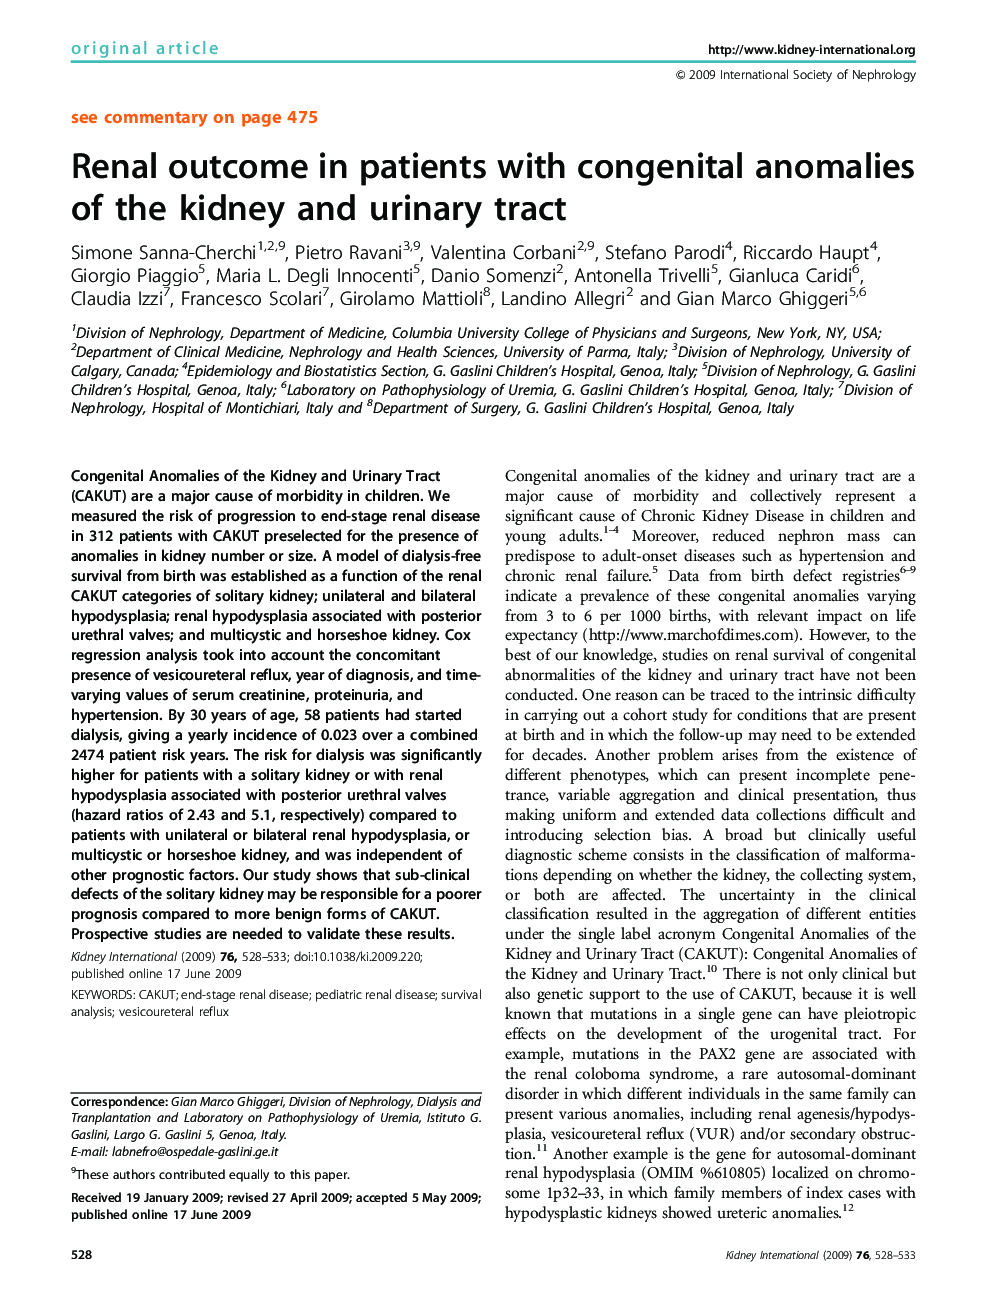 Renal outcome in patients with congenital anomalies of the kidney and urinary tract